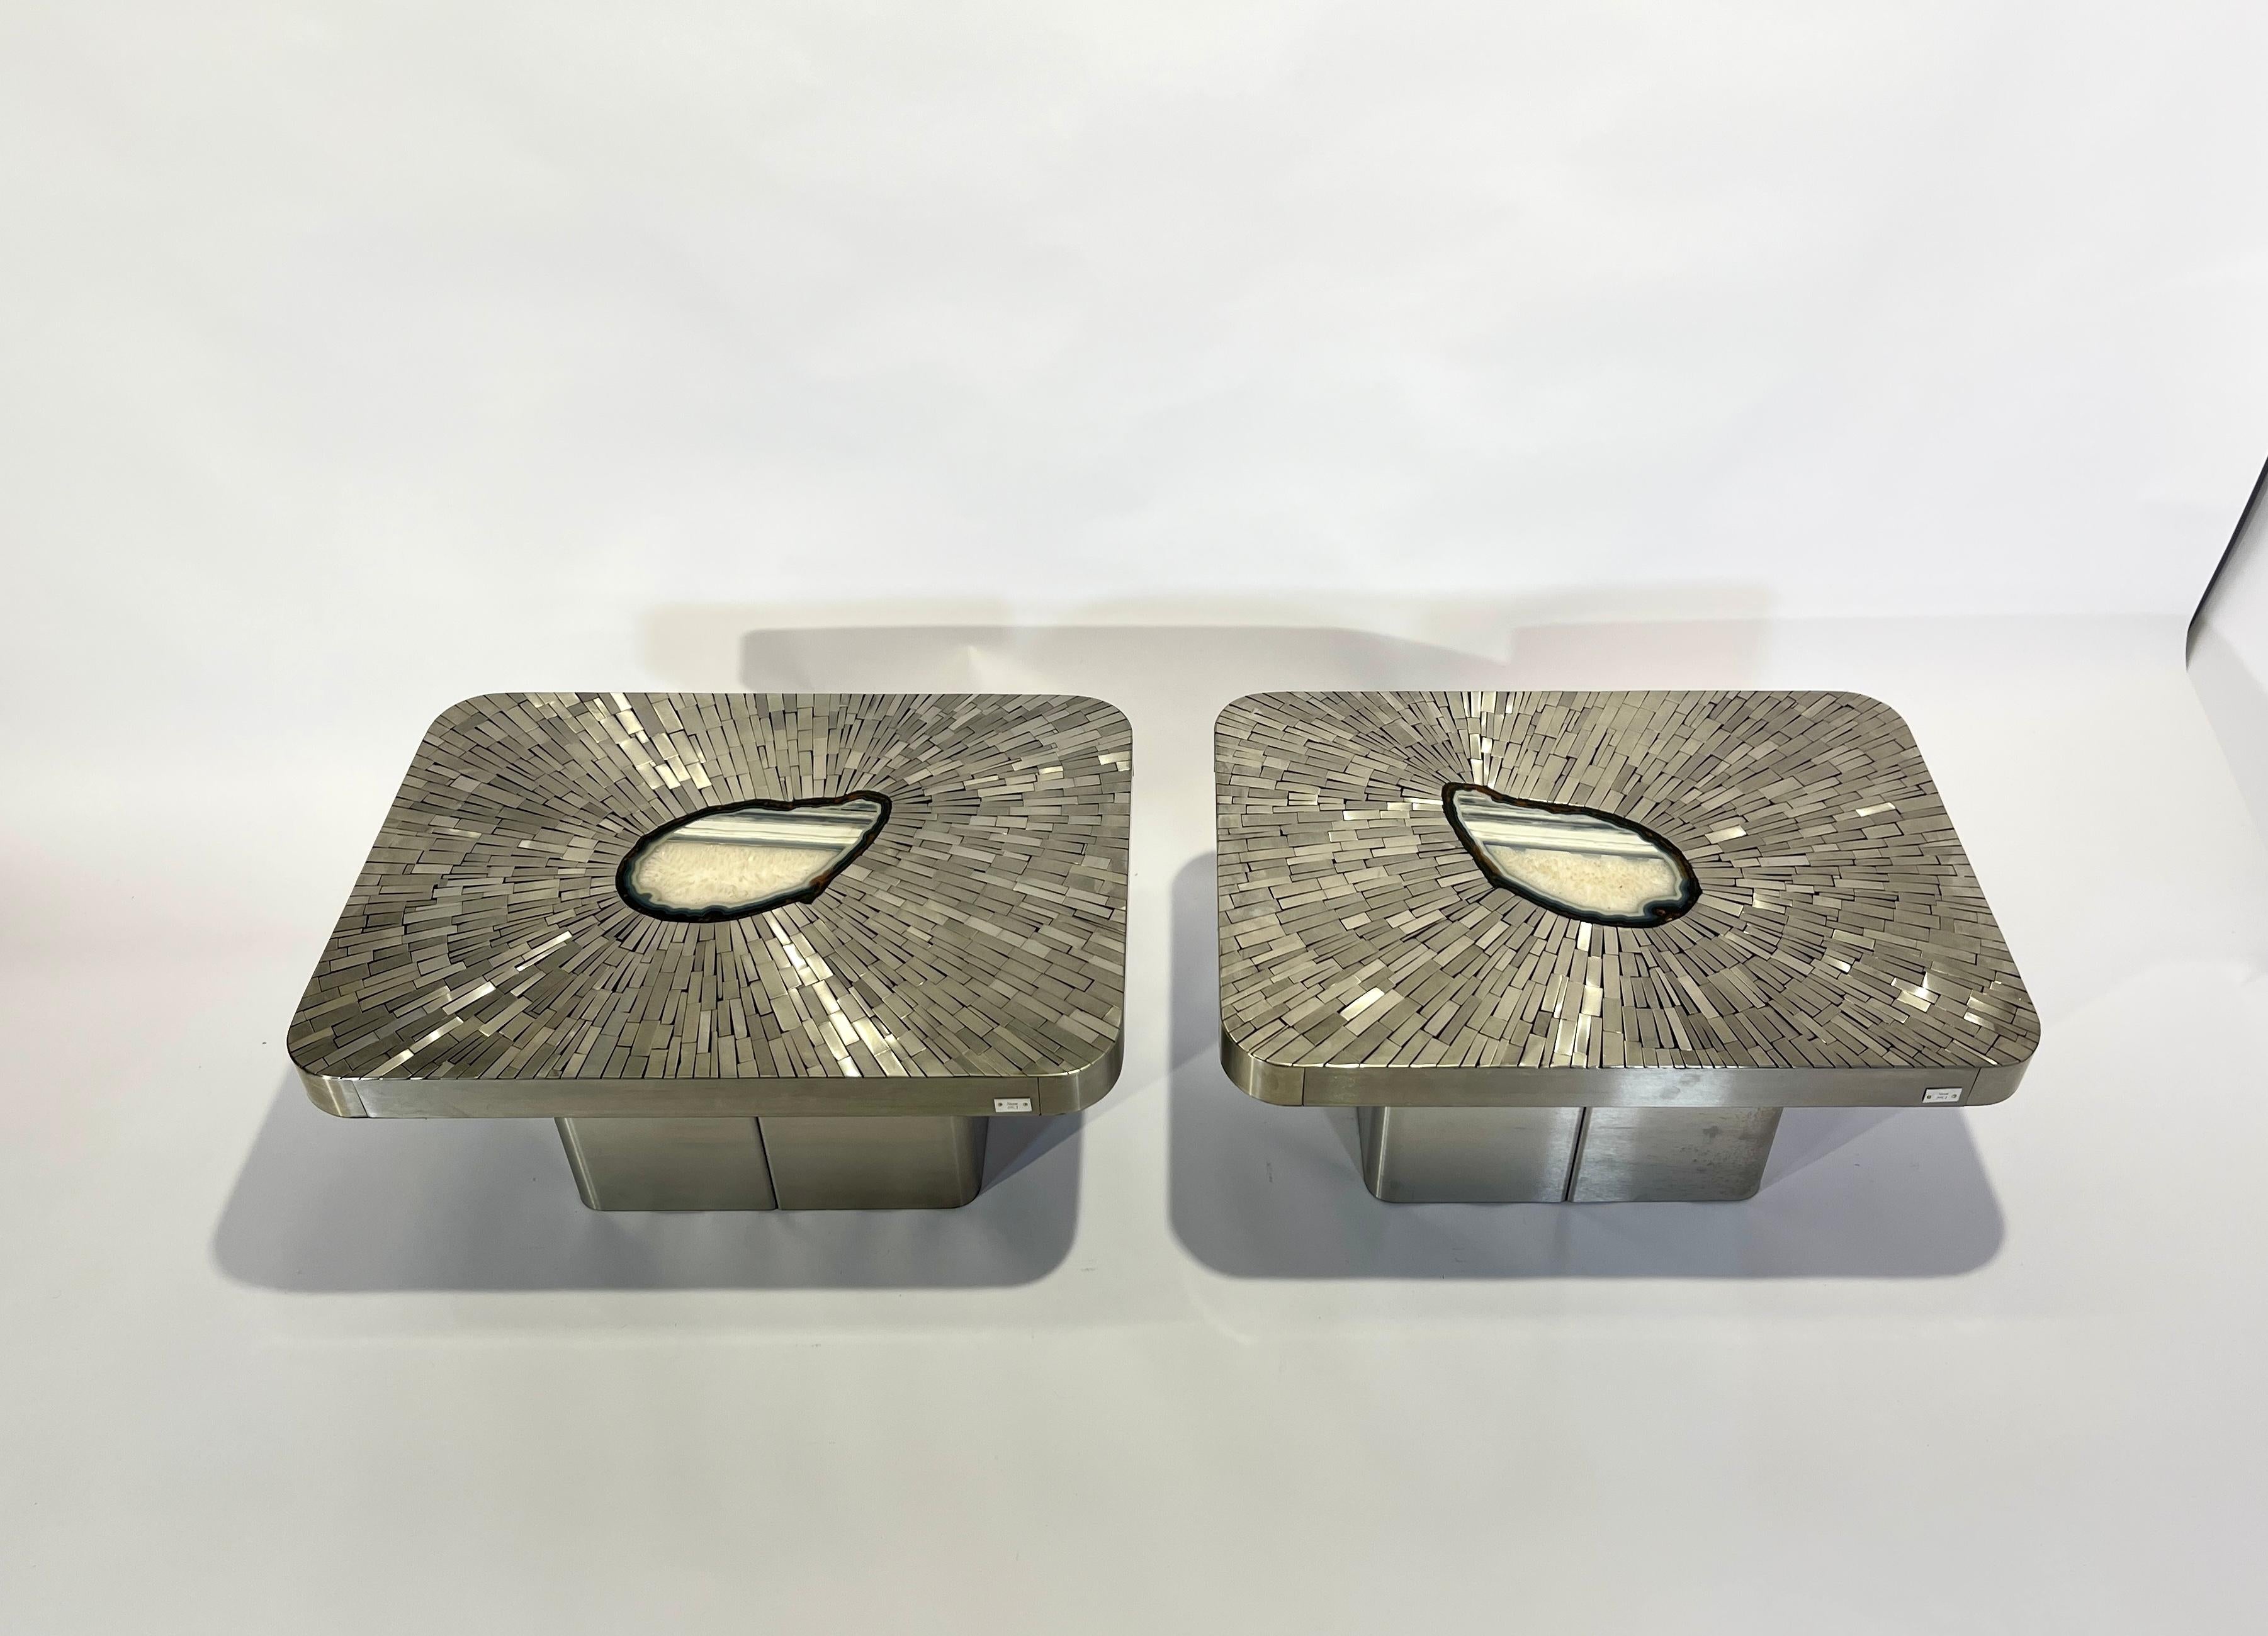 Created to measure by Stan Usel, pair of side table of stainless steel, side table topped with a magnificent mosaic stainless steel agate gemstone highlighting a mosaic radiation. Each piece is topped with a unique stone and when put together aside